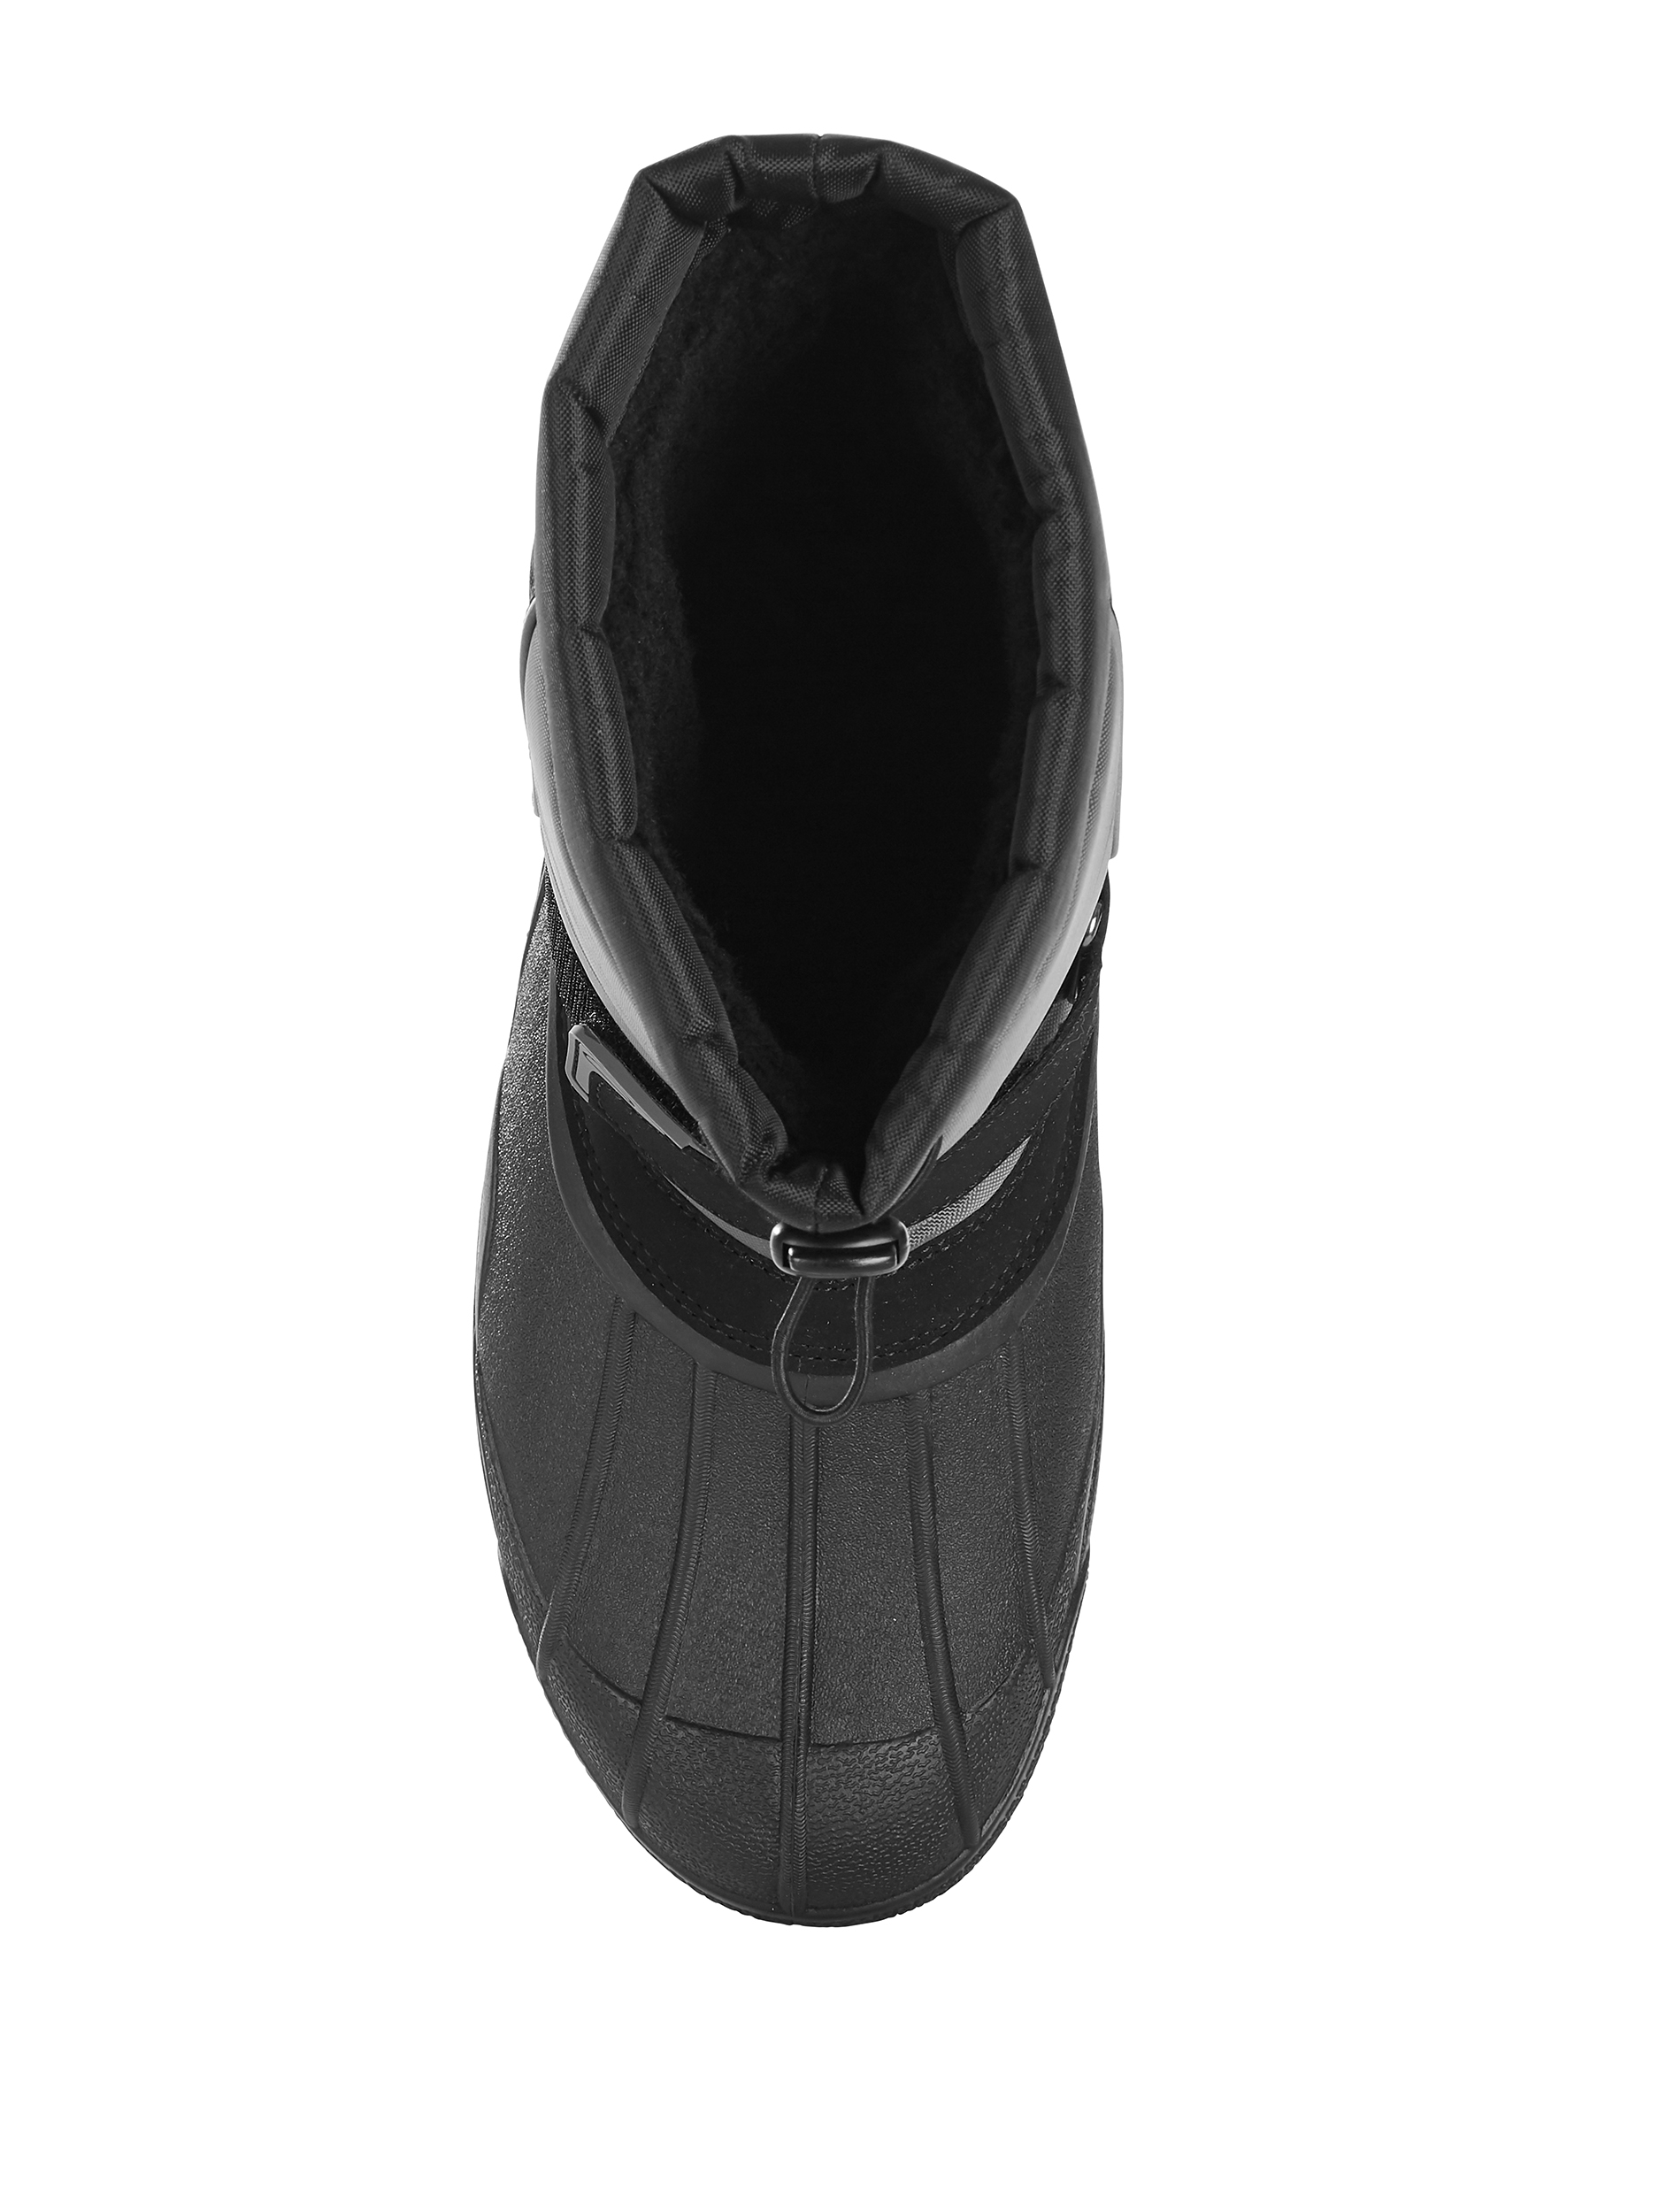 George Men's Essential Winter Boots - image 4 of 6